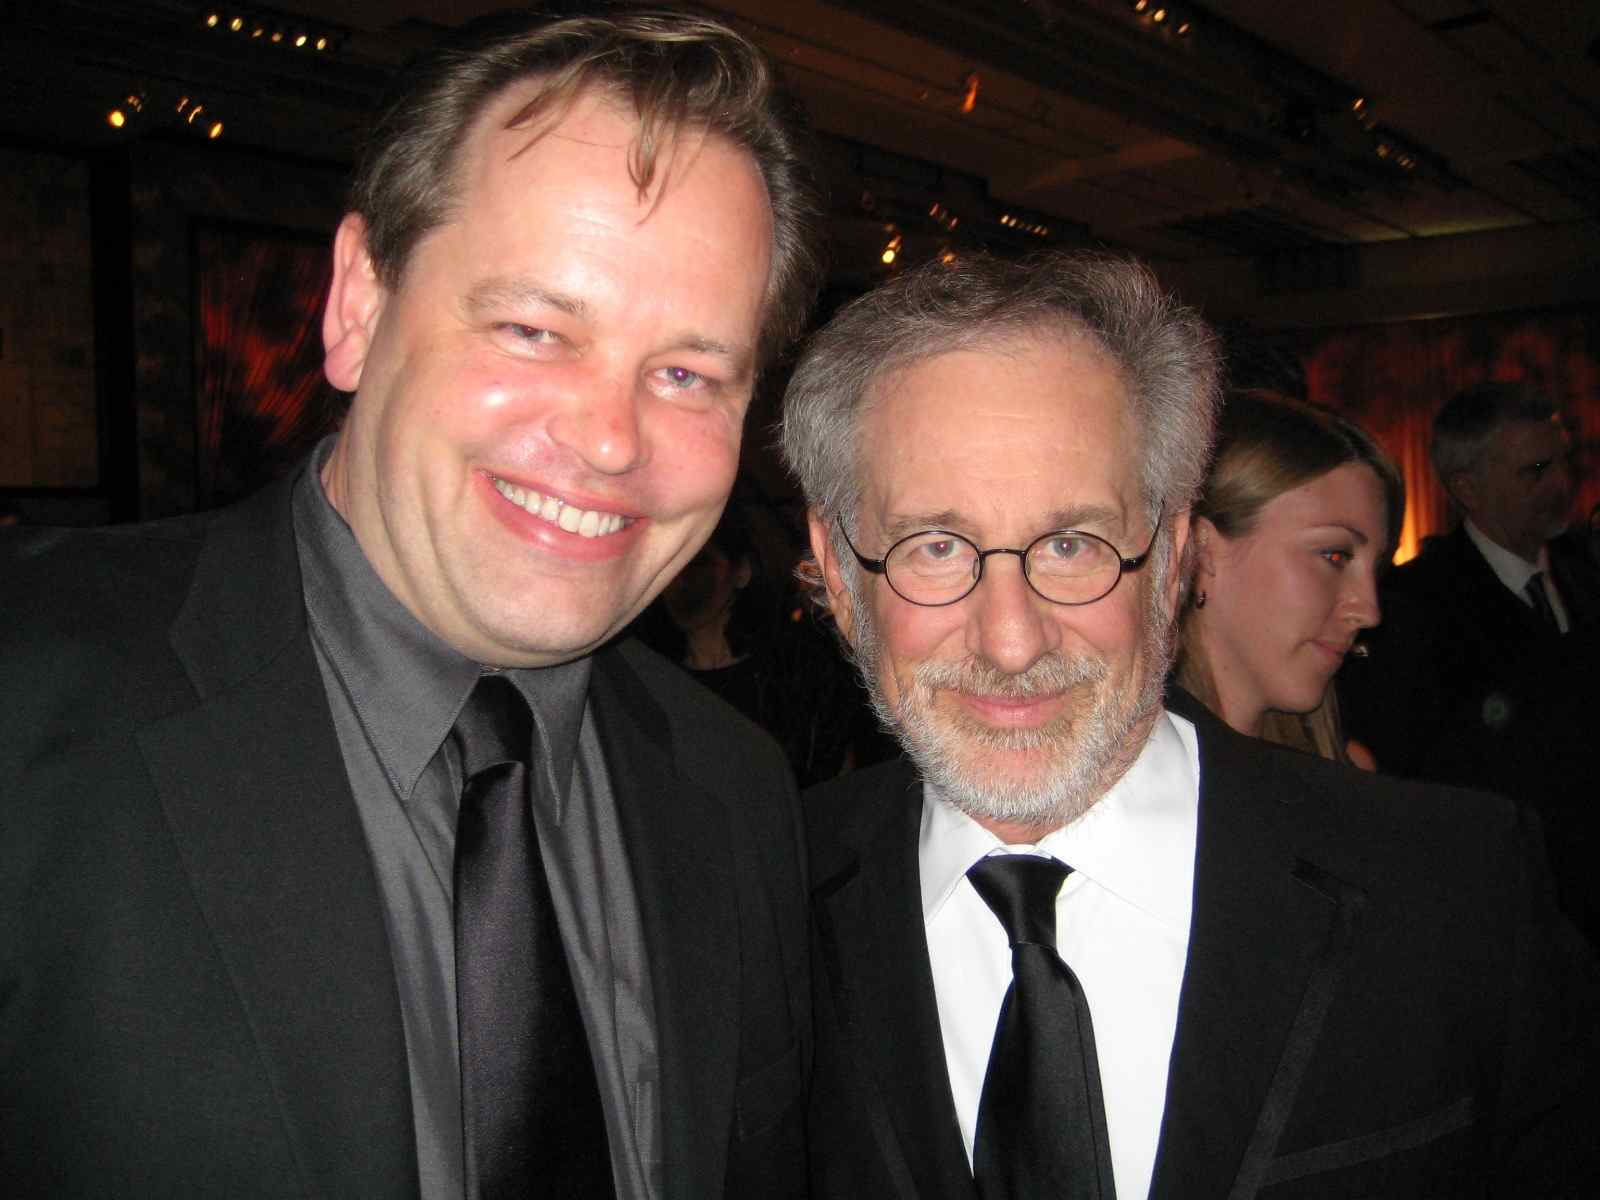 With Steven Spielberg at the VES Awards